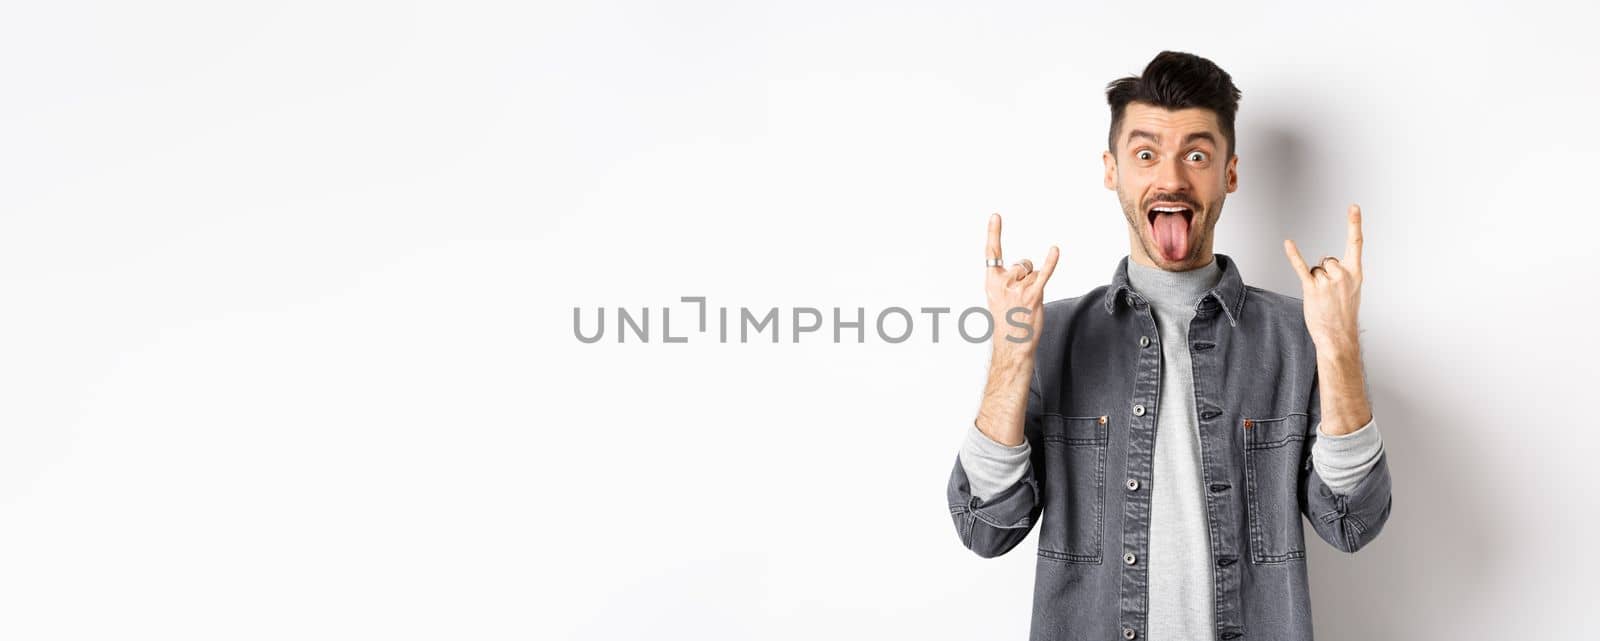 Excited funny guy showing tongue and heavy metal horns sign, enjoying party or event, having fun, standing on white background.